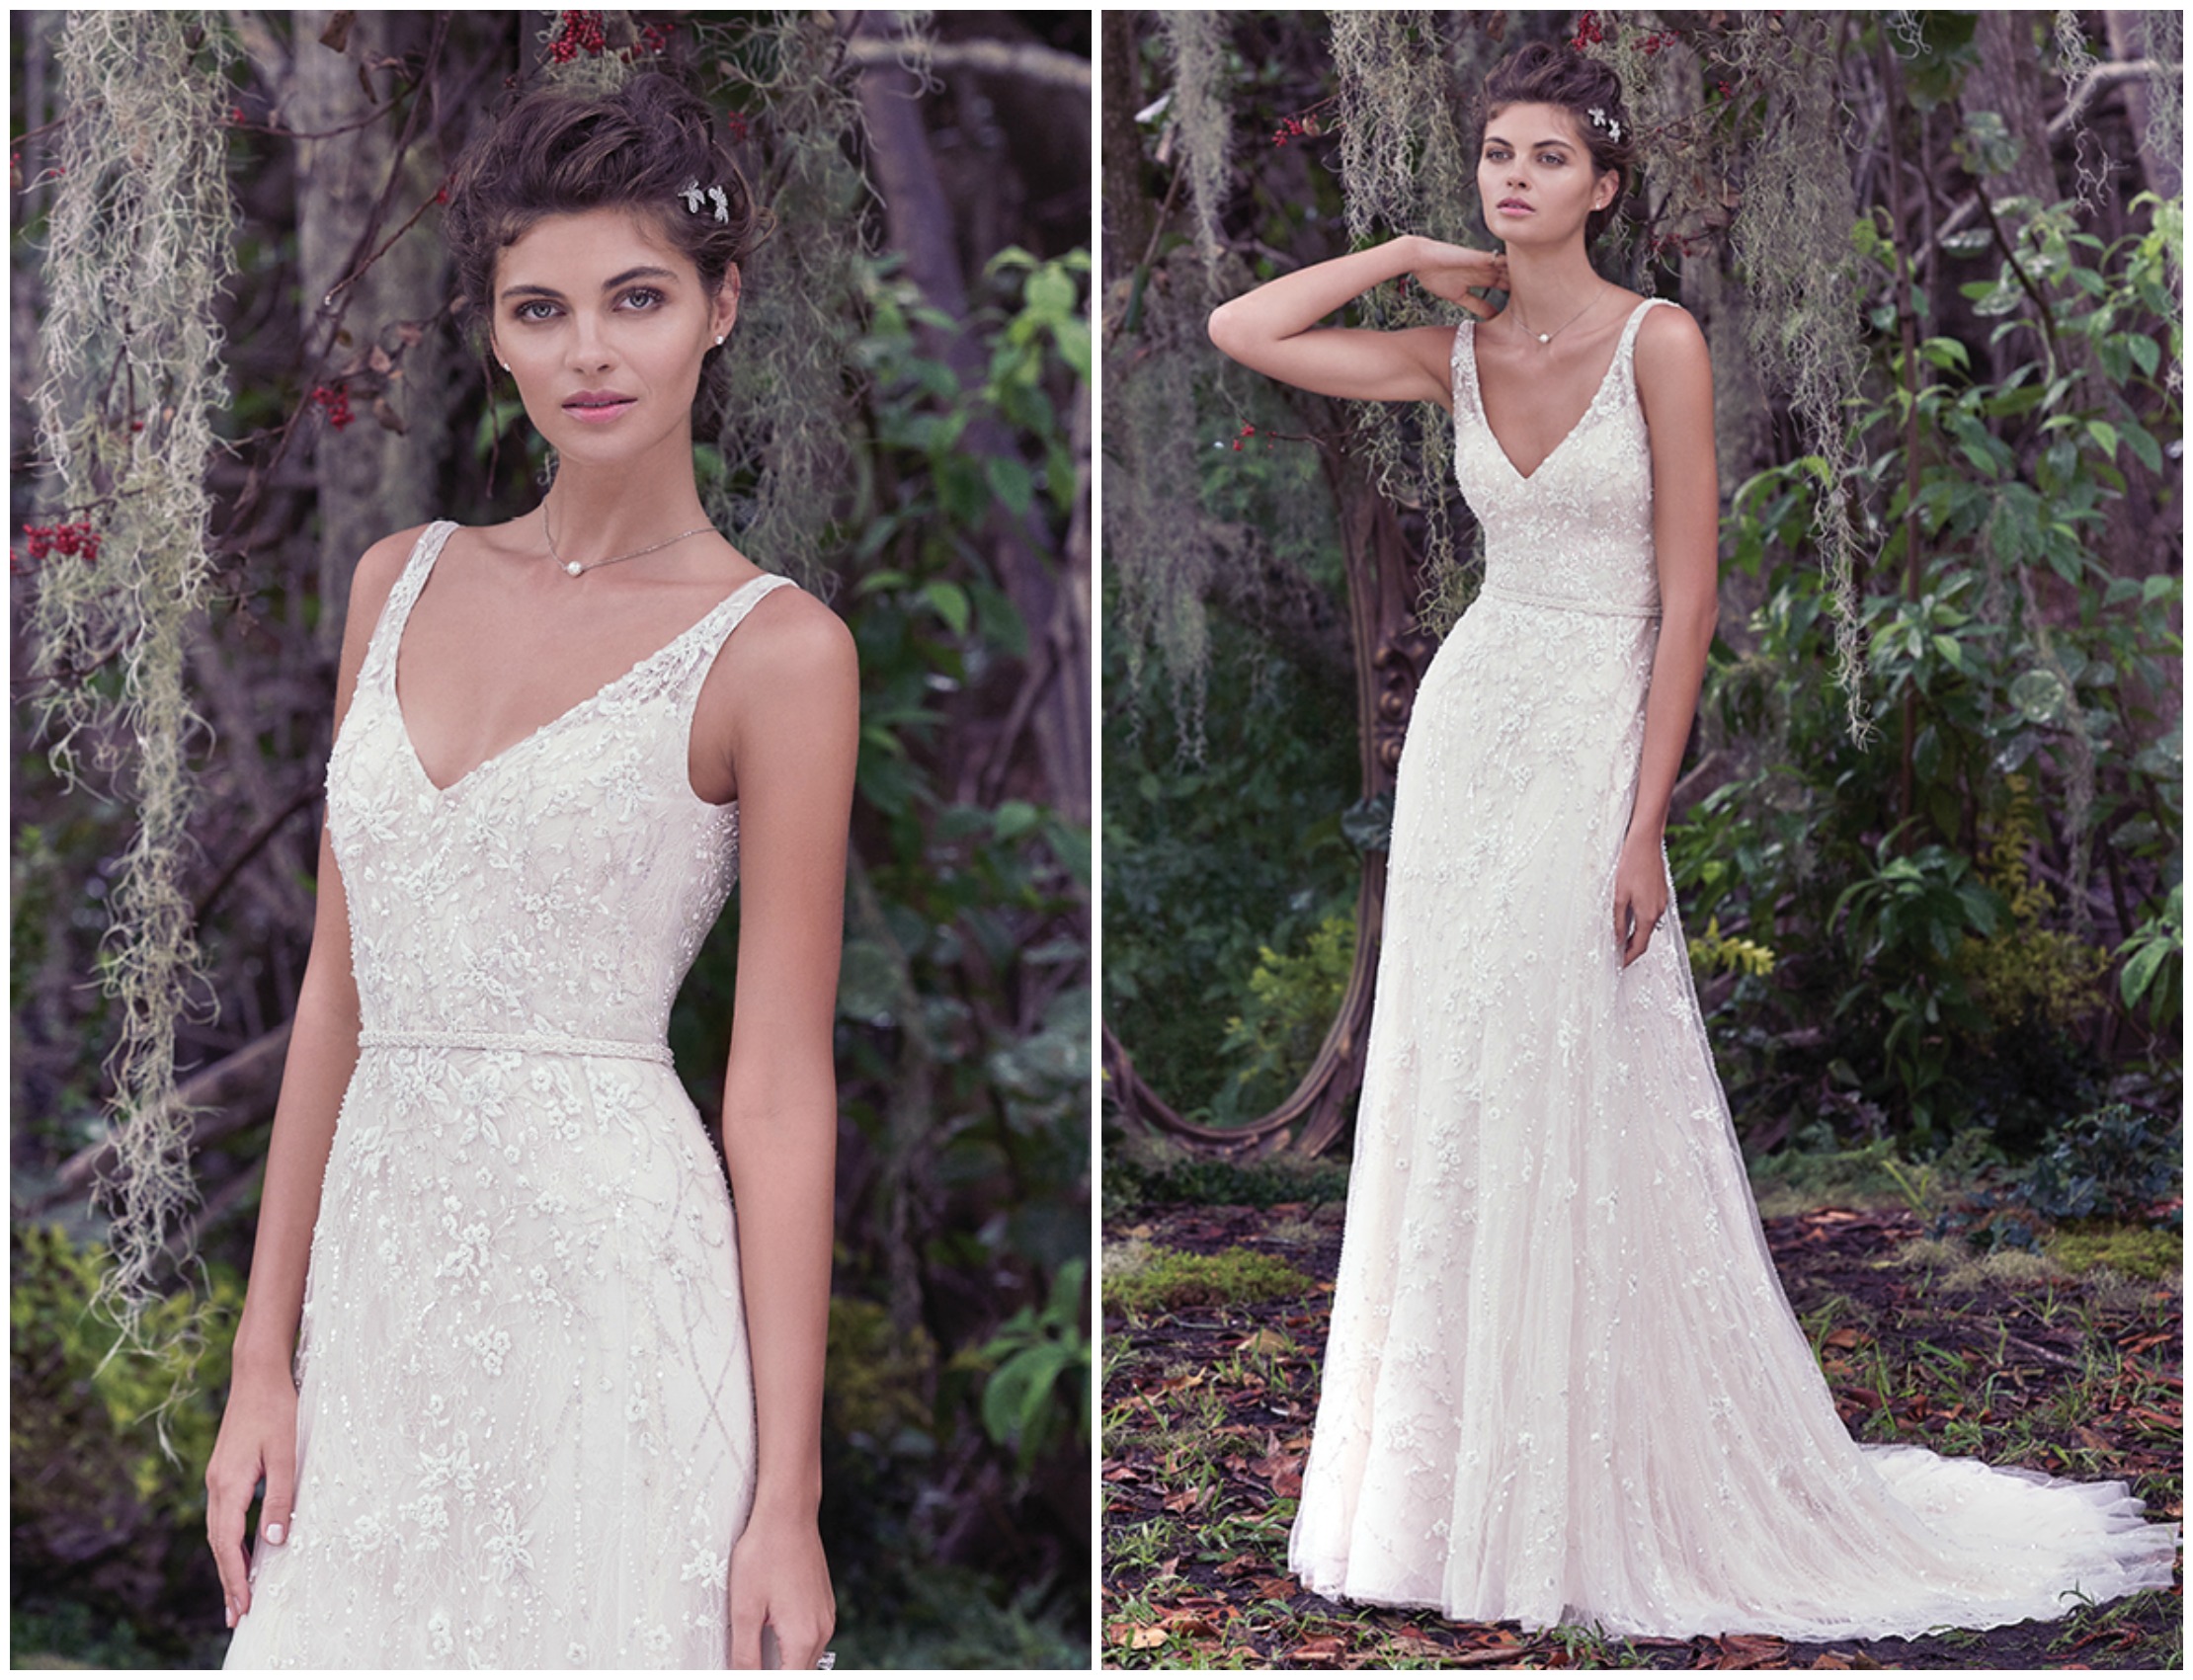 Dreamy and alluring, this A-line wedding dress features a Vogue satin slip and an intricately embroidered overlay with lace. A plunging V-back and beaded belt completes this romantic gown. Finished with covered buttons over zipper closure. 

<a href="https://www.maggiesottero.com/maggie-sottero/jorie/9704" target="_blank">Maggie Sottero</a>